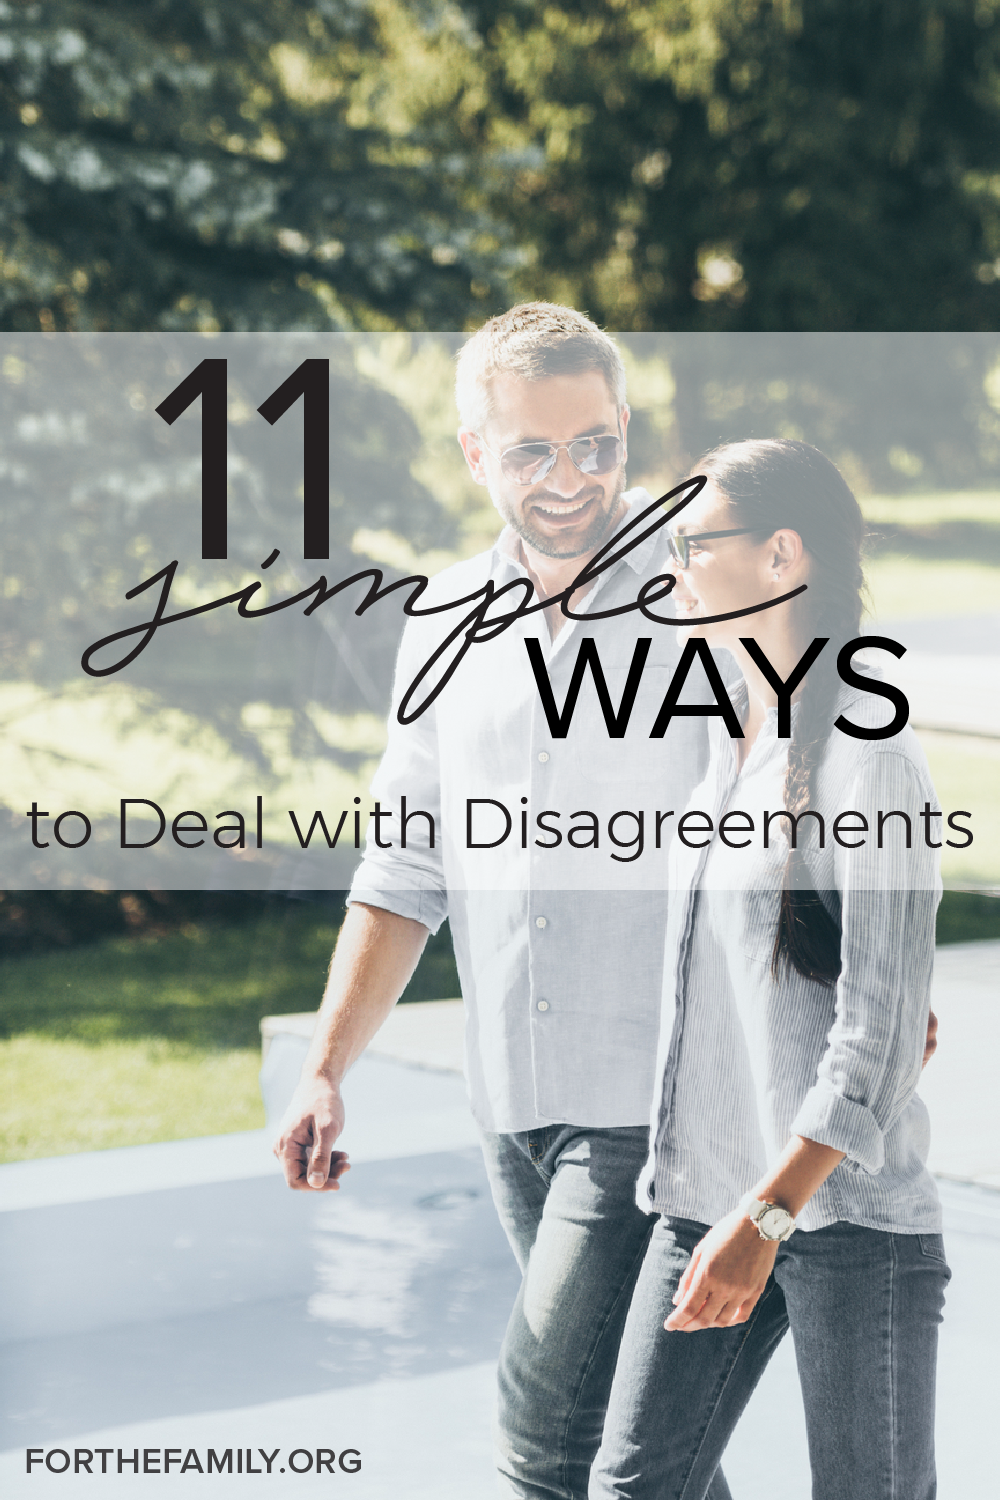 11 Simple Ways to Deal with Disagreements